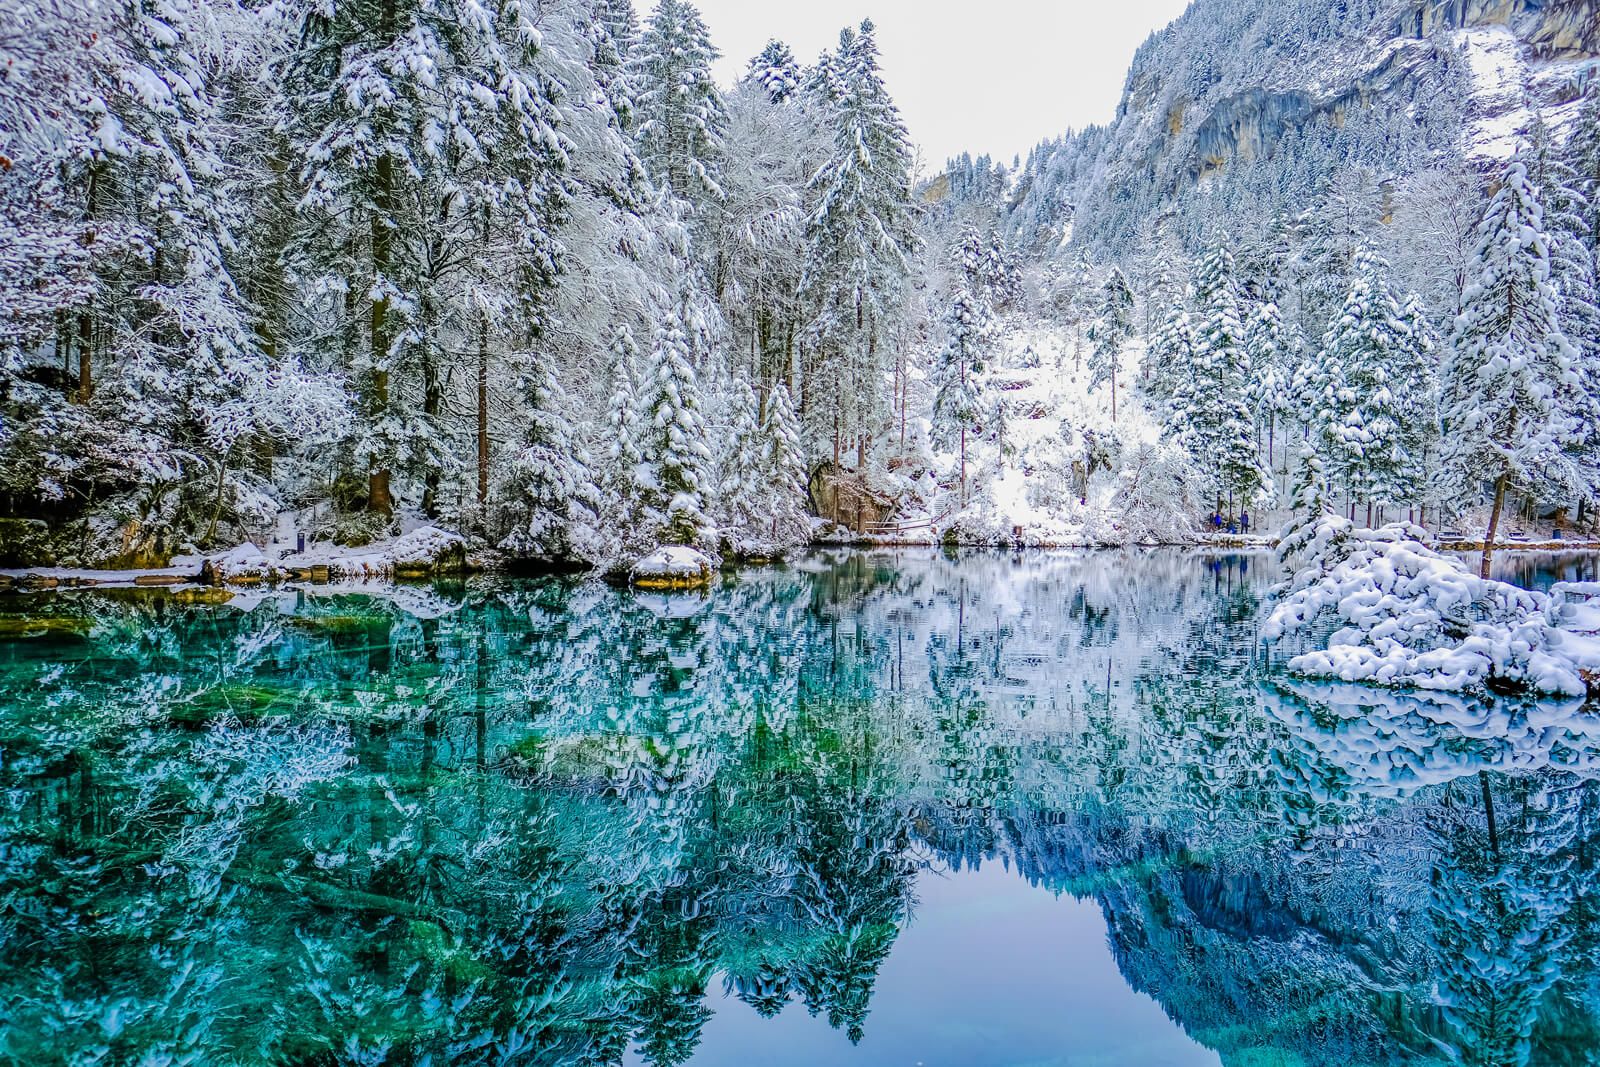 See why Lake Blausee is stunning during all seasons